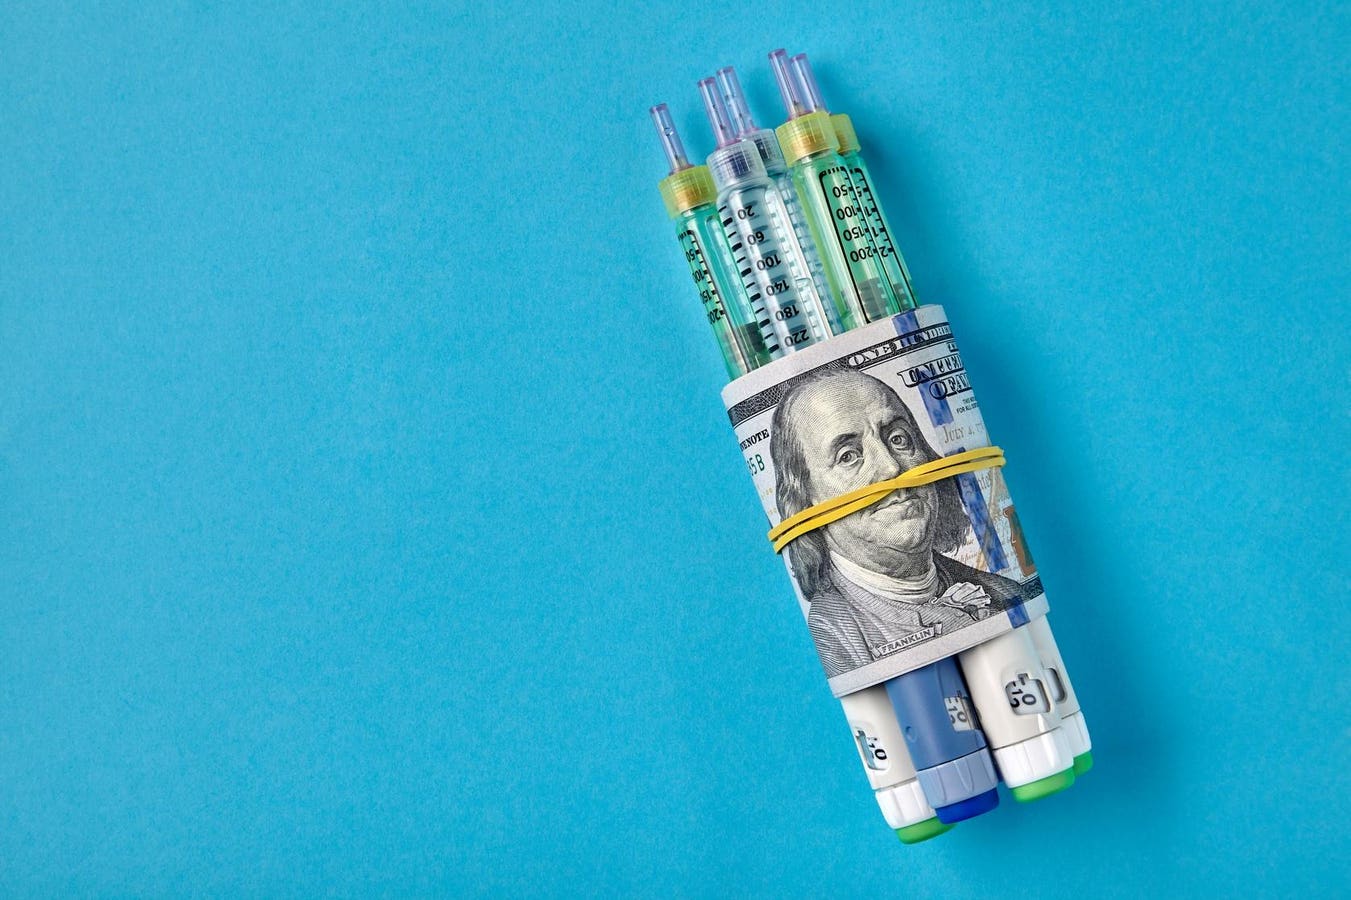 Despite the lower out-of-pocket costs, insulin affordability remains a problem